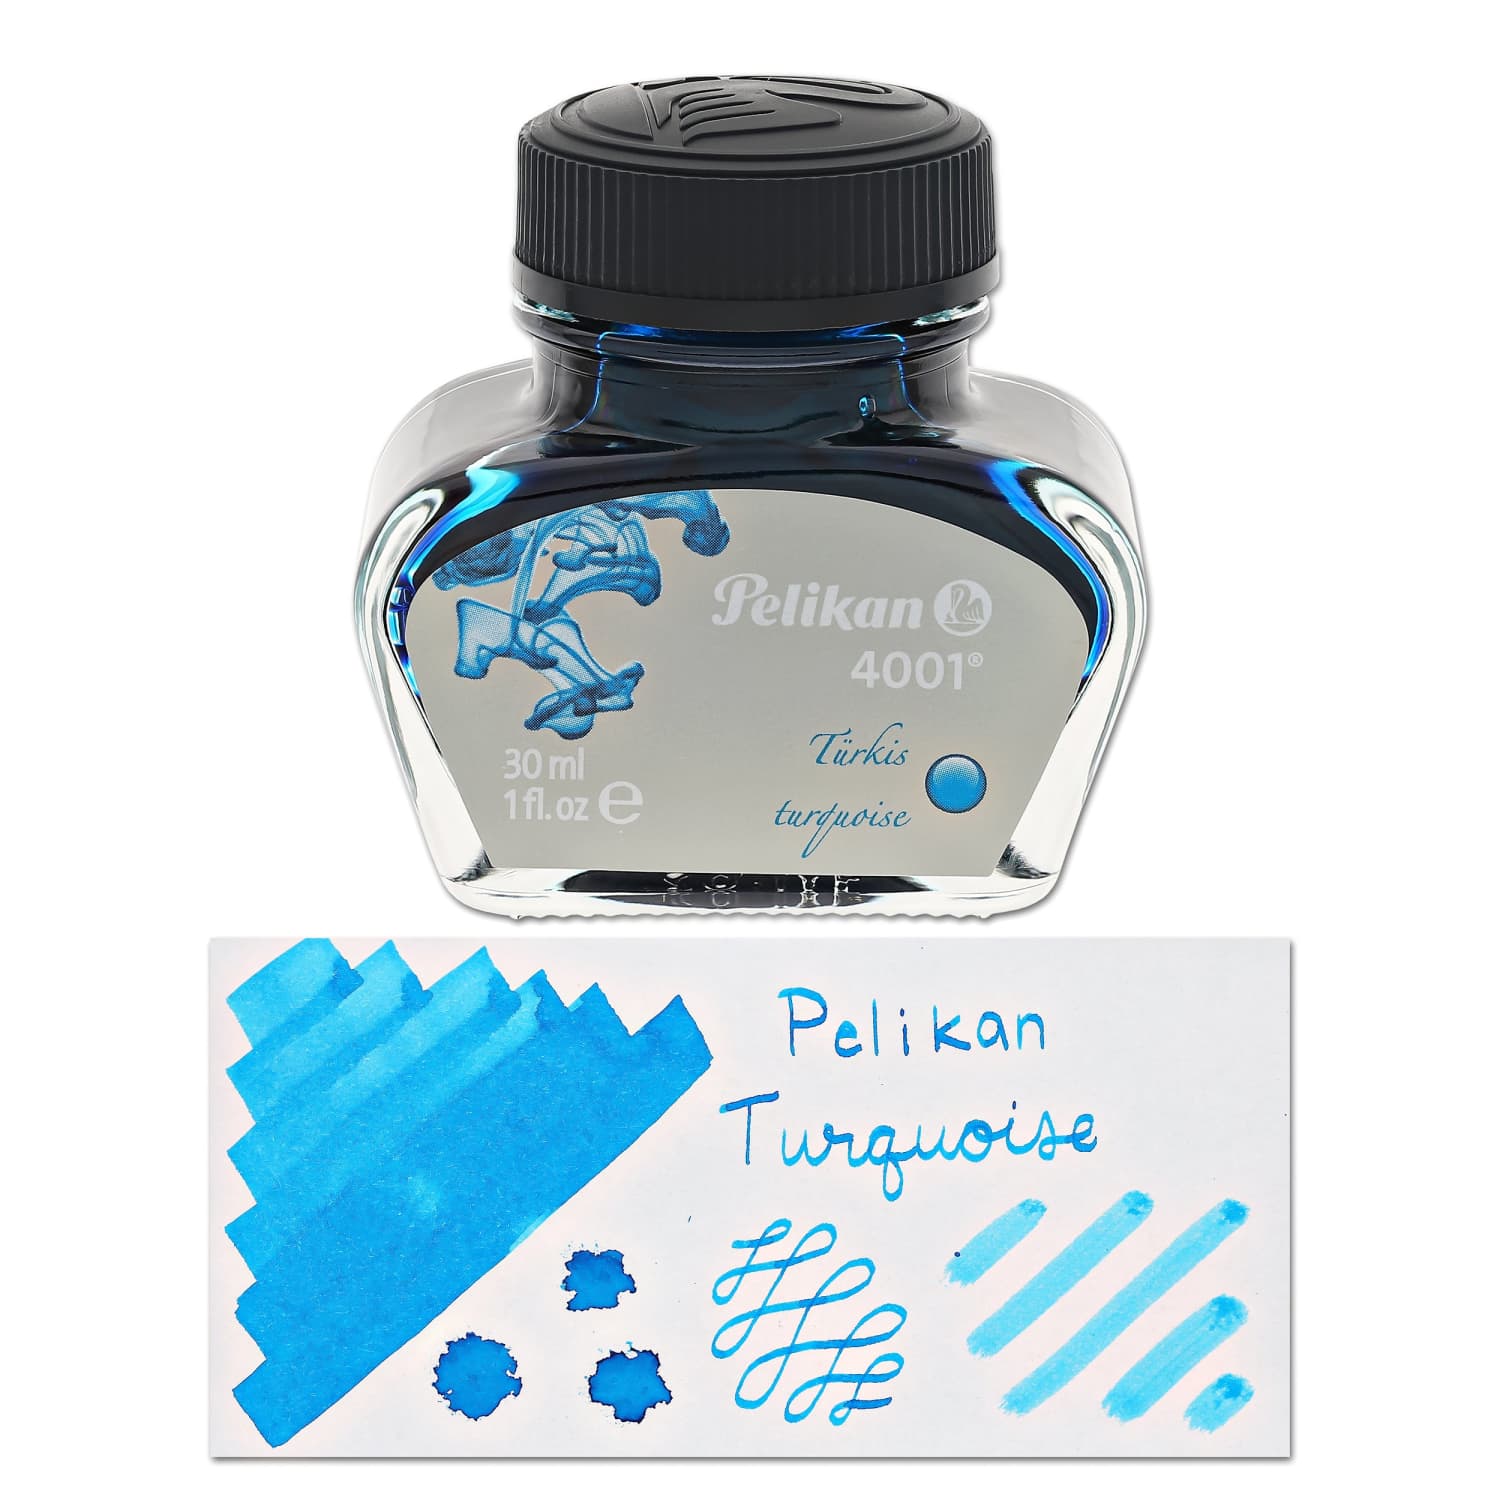 Pelikan 4001 Bottled Ink and Cartridges in Turquoise